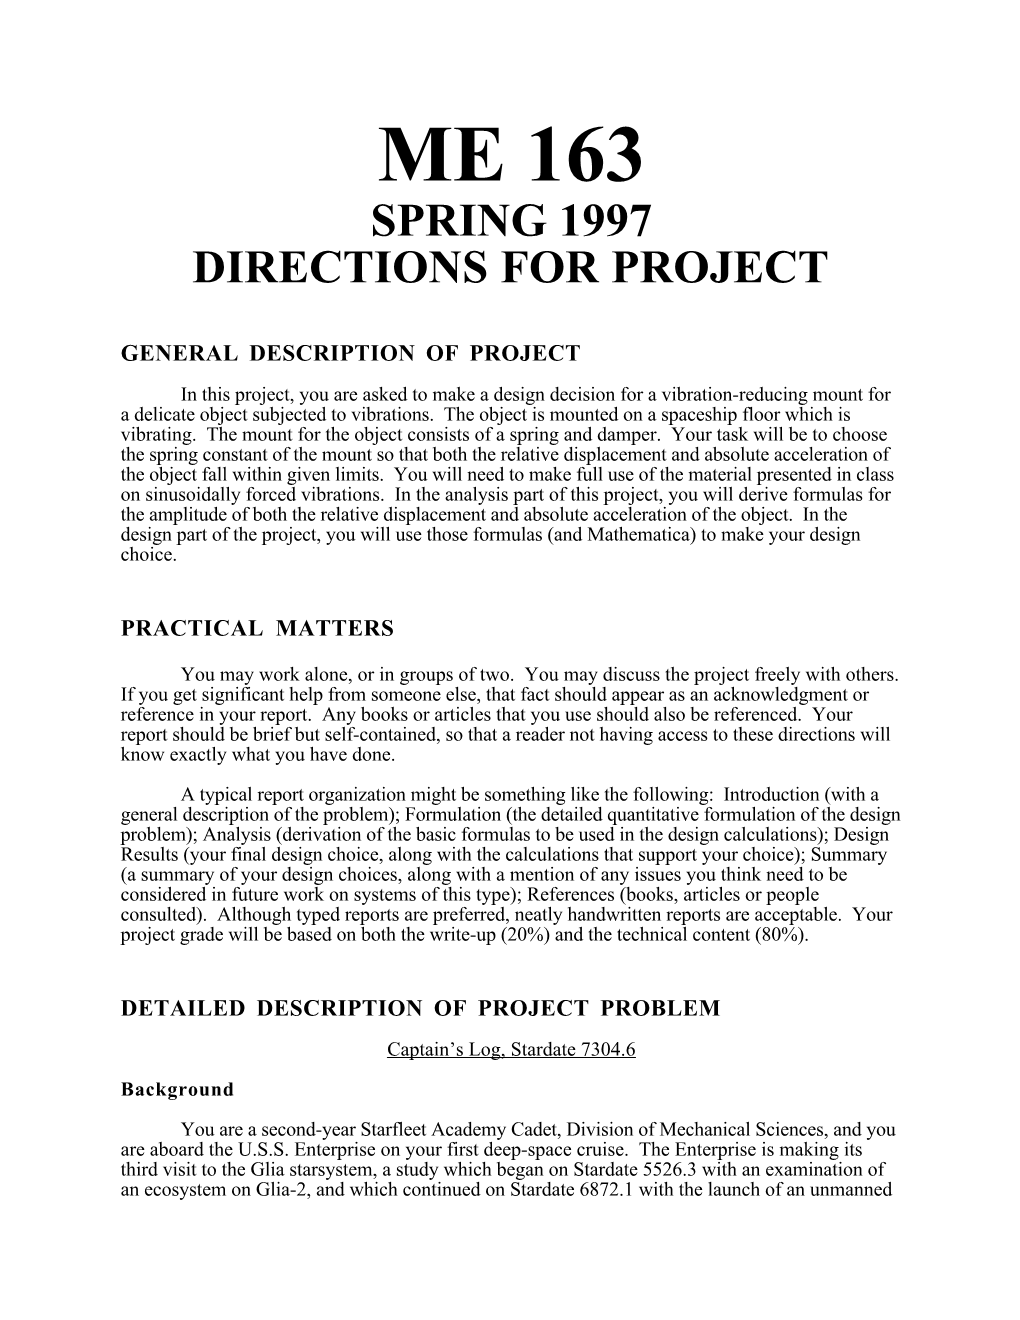 Me 163 Spring 1997 Directions for Project